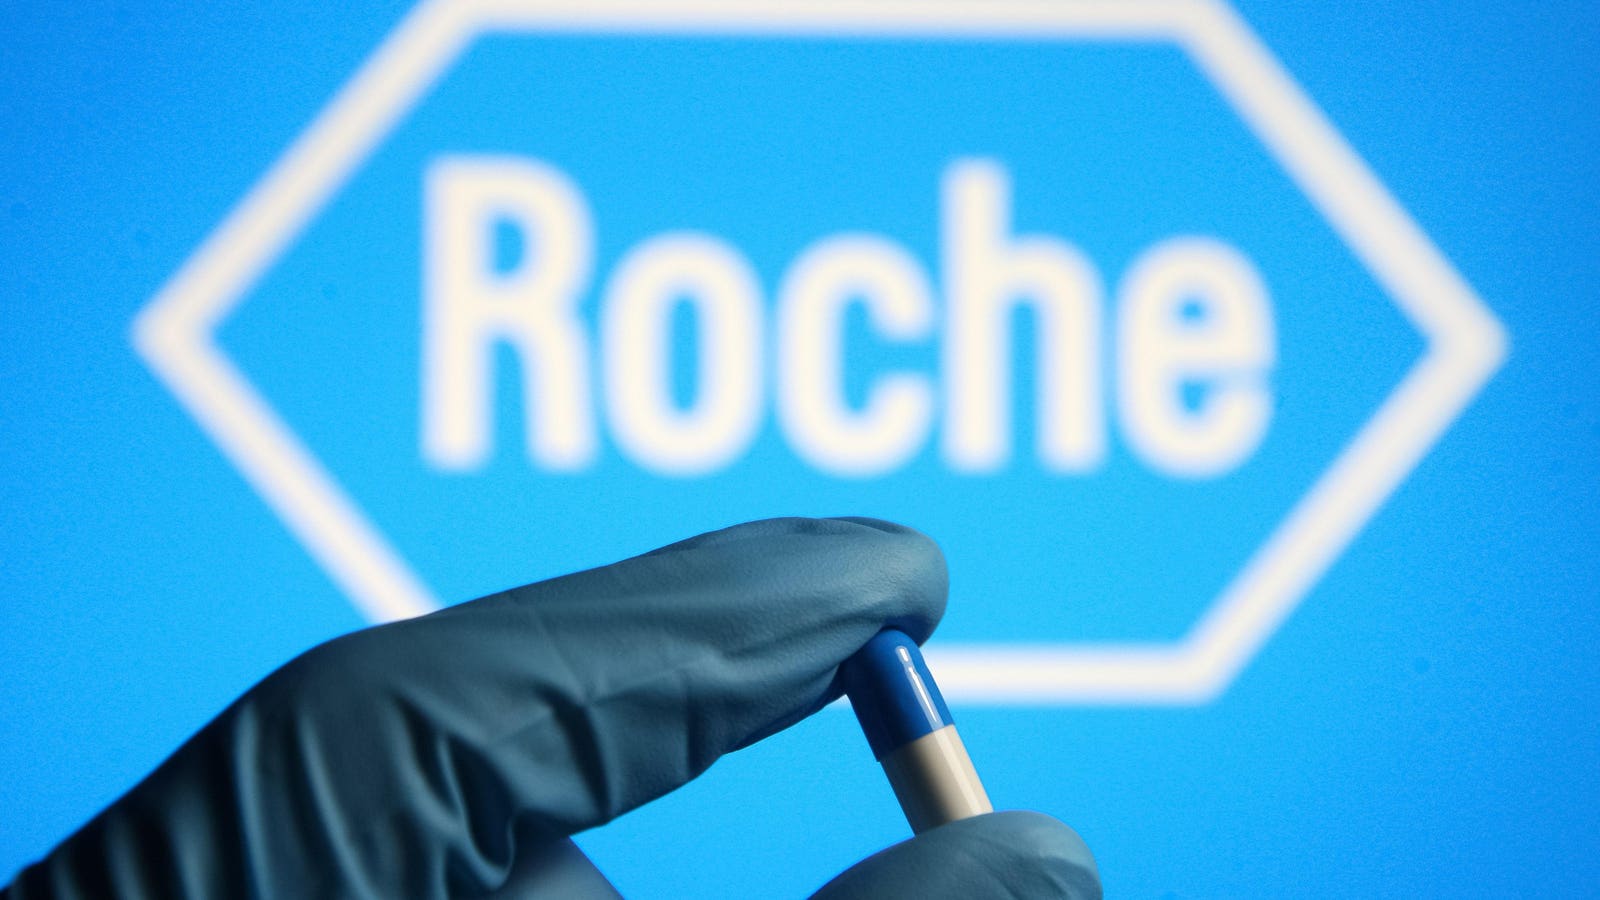 Roche Moves Ahead With Once-Daily Weight Loss Pill